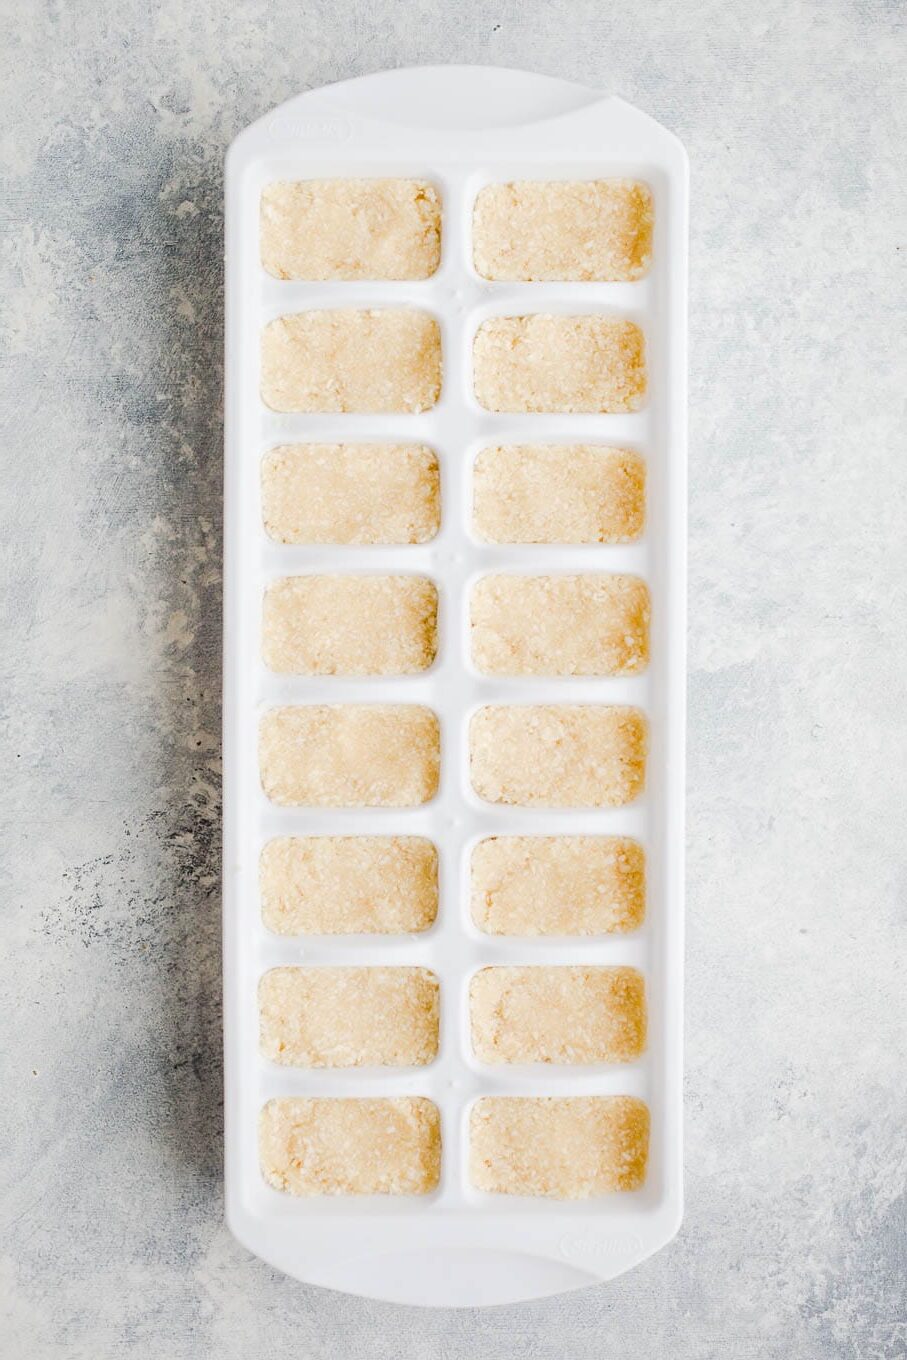 Coconut in a ice cube tray.